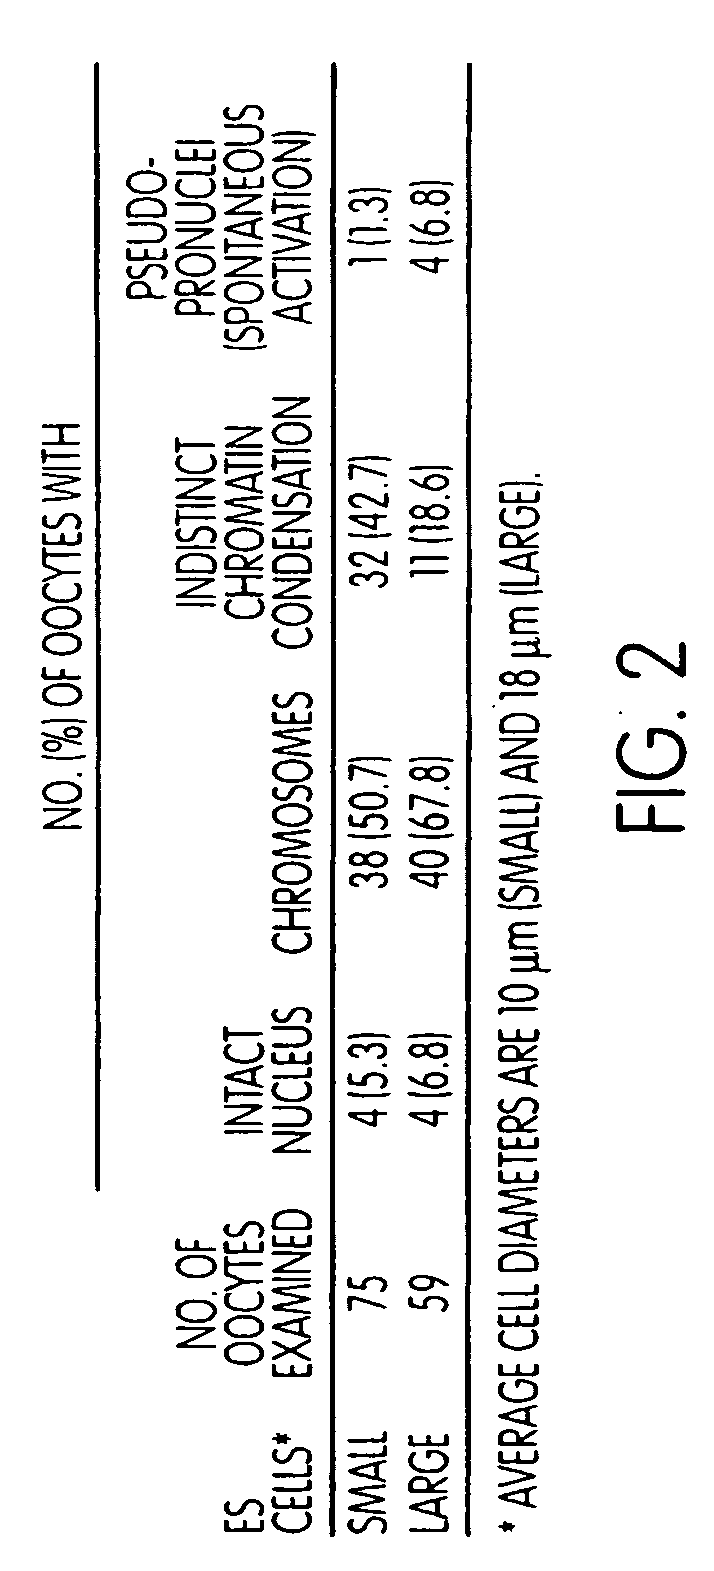 Method to produce cloned embryos and adults from cultured cells